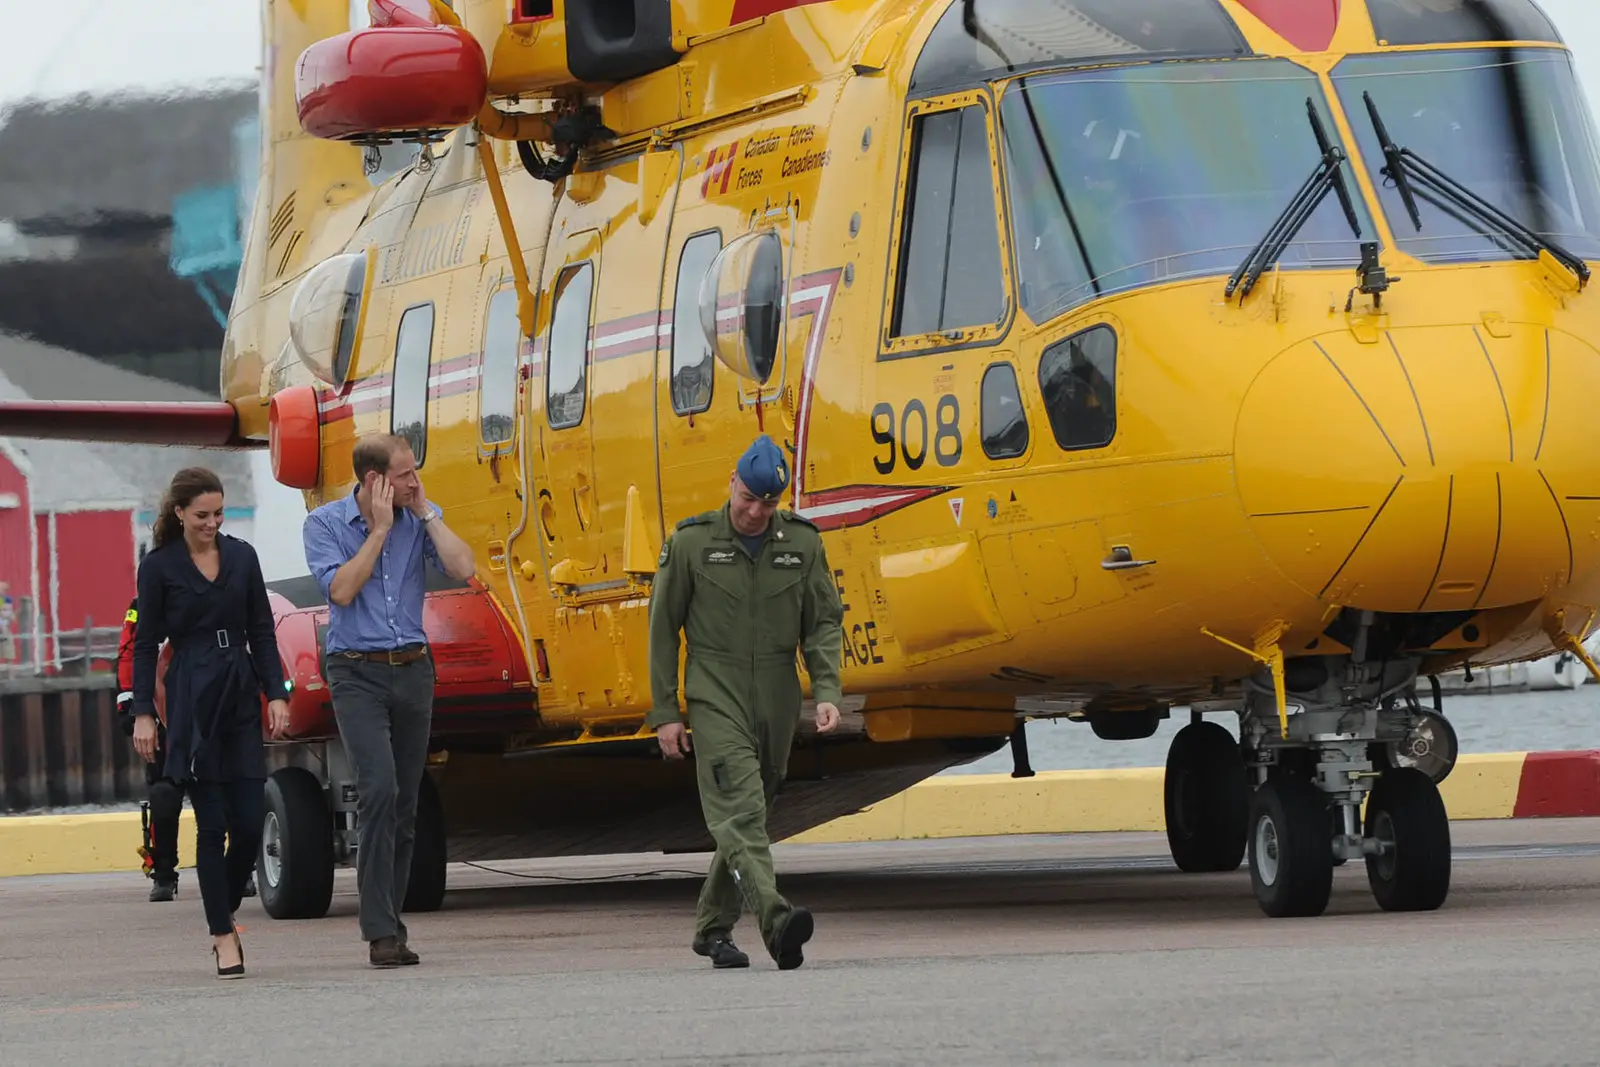 William and catherine observed search and rescue operation in PEI